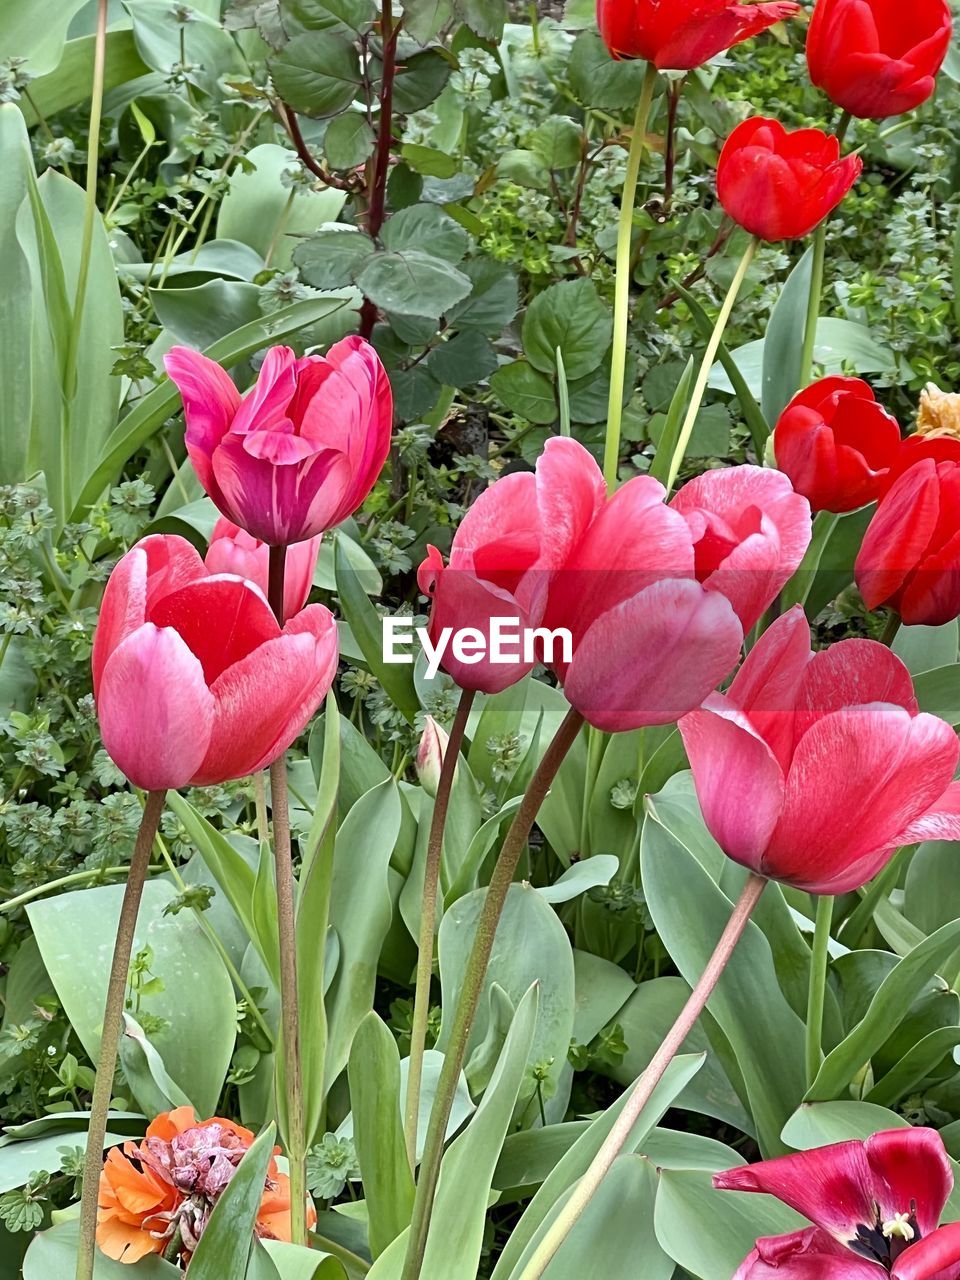 plant, flower, flowering plant, beauty in nature, freshness, petal, growth, fragility, nature, flower head, red, tulip, inflorescence, close-up, leaf, plant part, pink, no people, green, day, springtime, botany, outdoors, blossom, flowerbed, plant stem